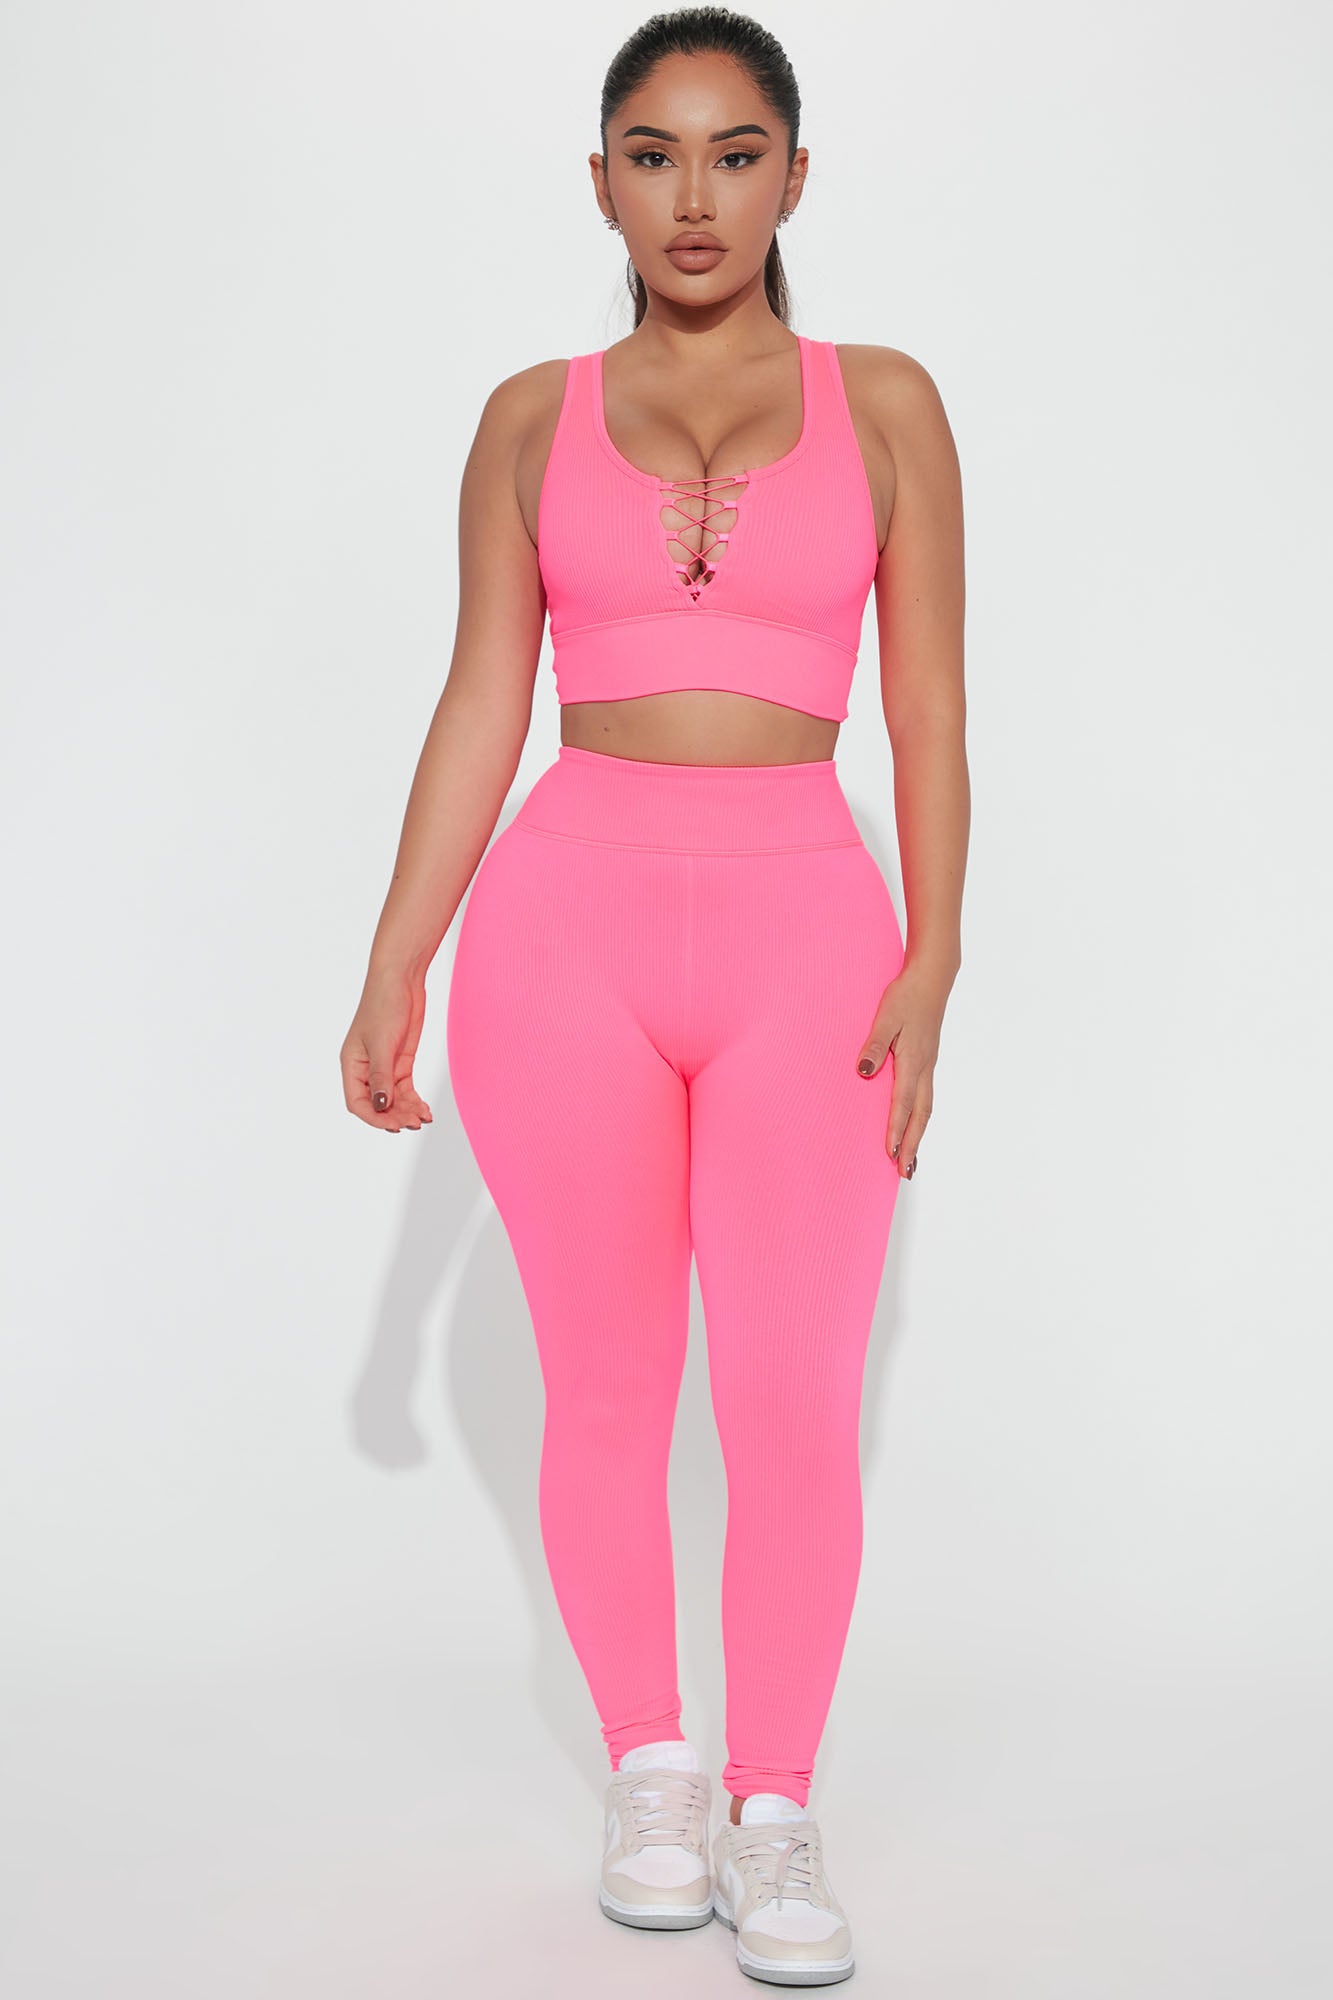 Get Up And Go Seamless Top - Hot Pink